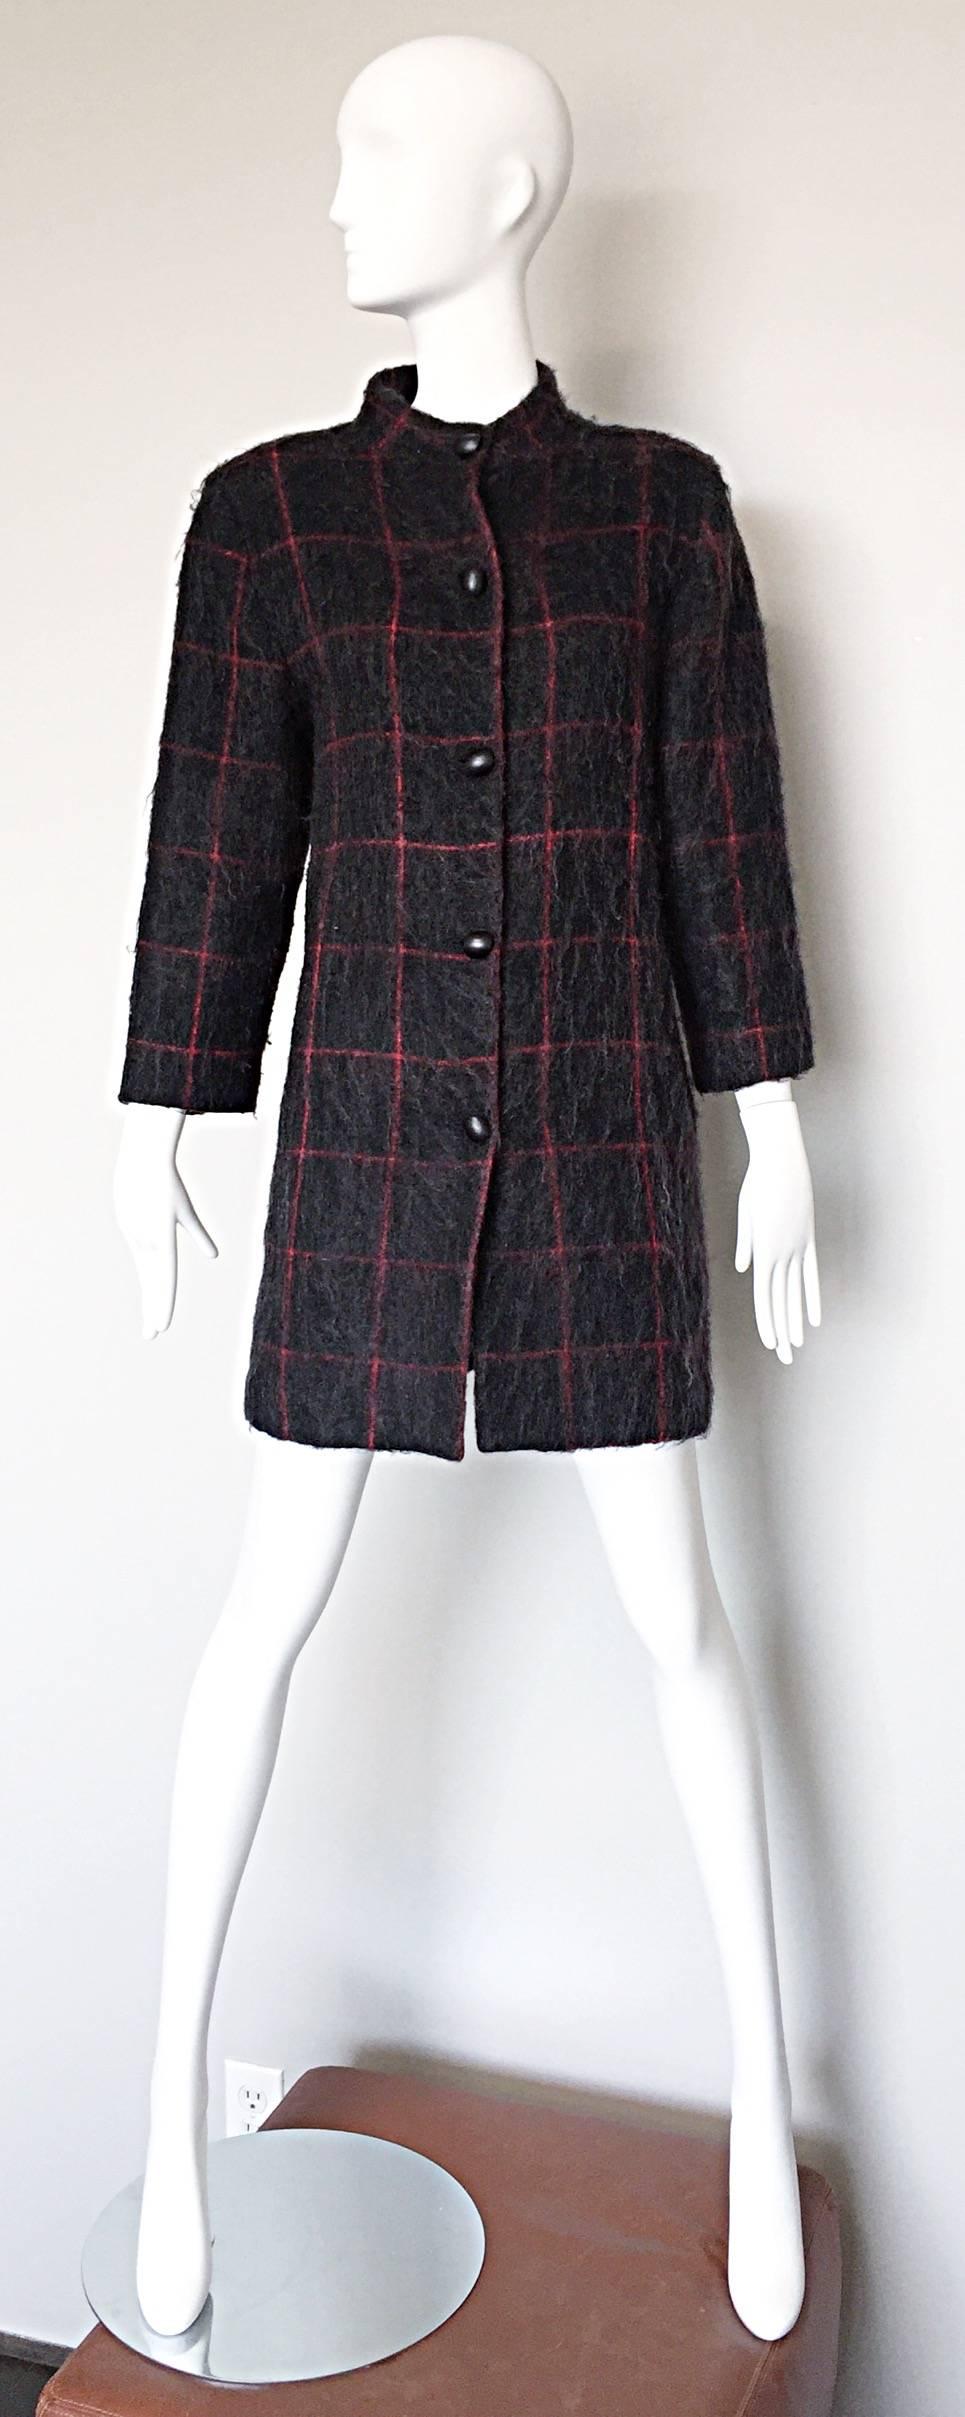 Chic early 1980s GEOFFREY BEENE (Beene Bag) grey and red plaid Swing Jacket! Chic wool and mohair blend with an oversized plaid print throughout. Black lacquer buttons up the front. Pockets at each side of the waist. Fully lined. The perfect